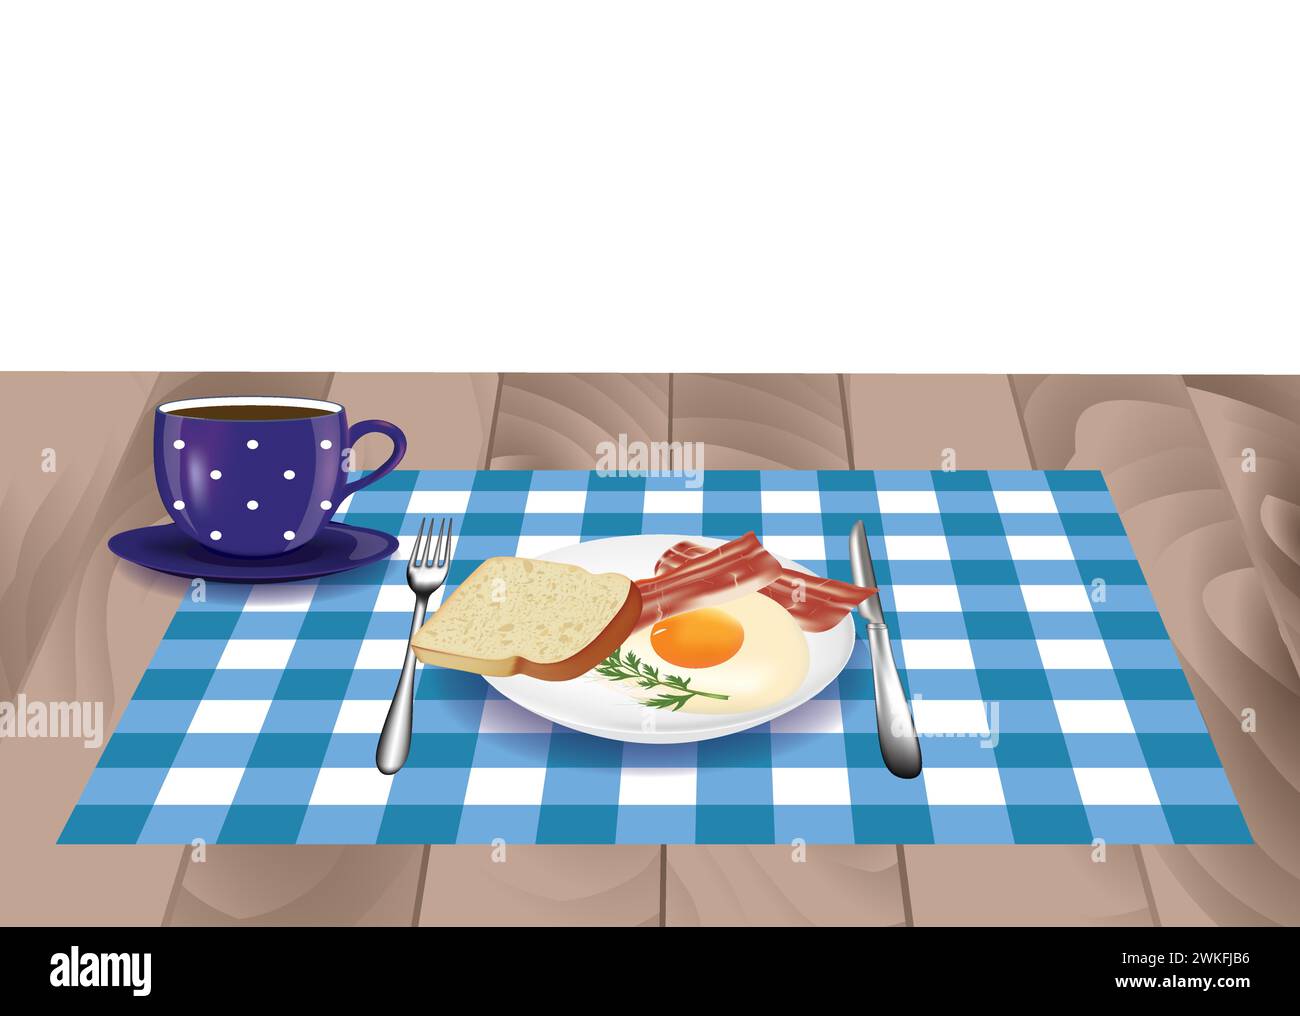 Breakfast plate on the table, vector Stock Vector